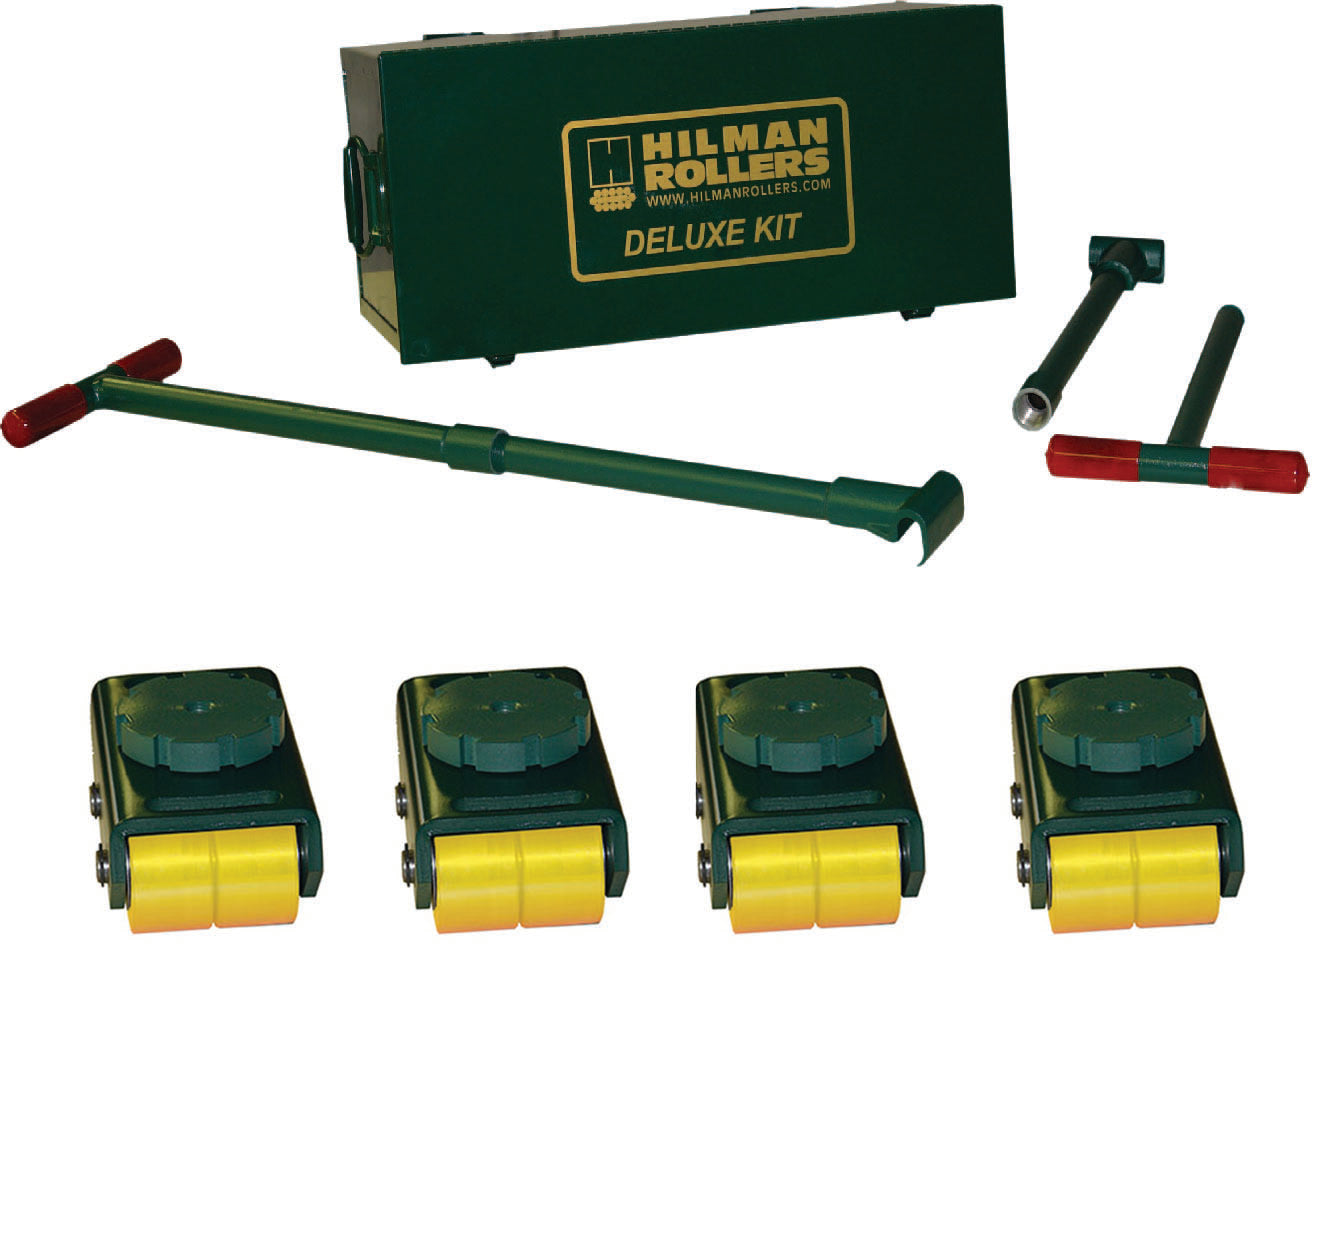 Hilman 12 Ton Swivel Smooth Top Bull Dolly Kit with Poly Wheels